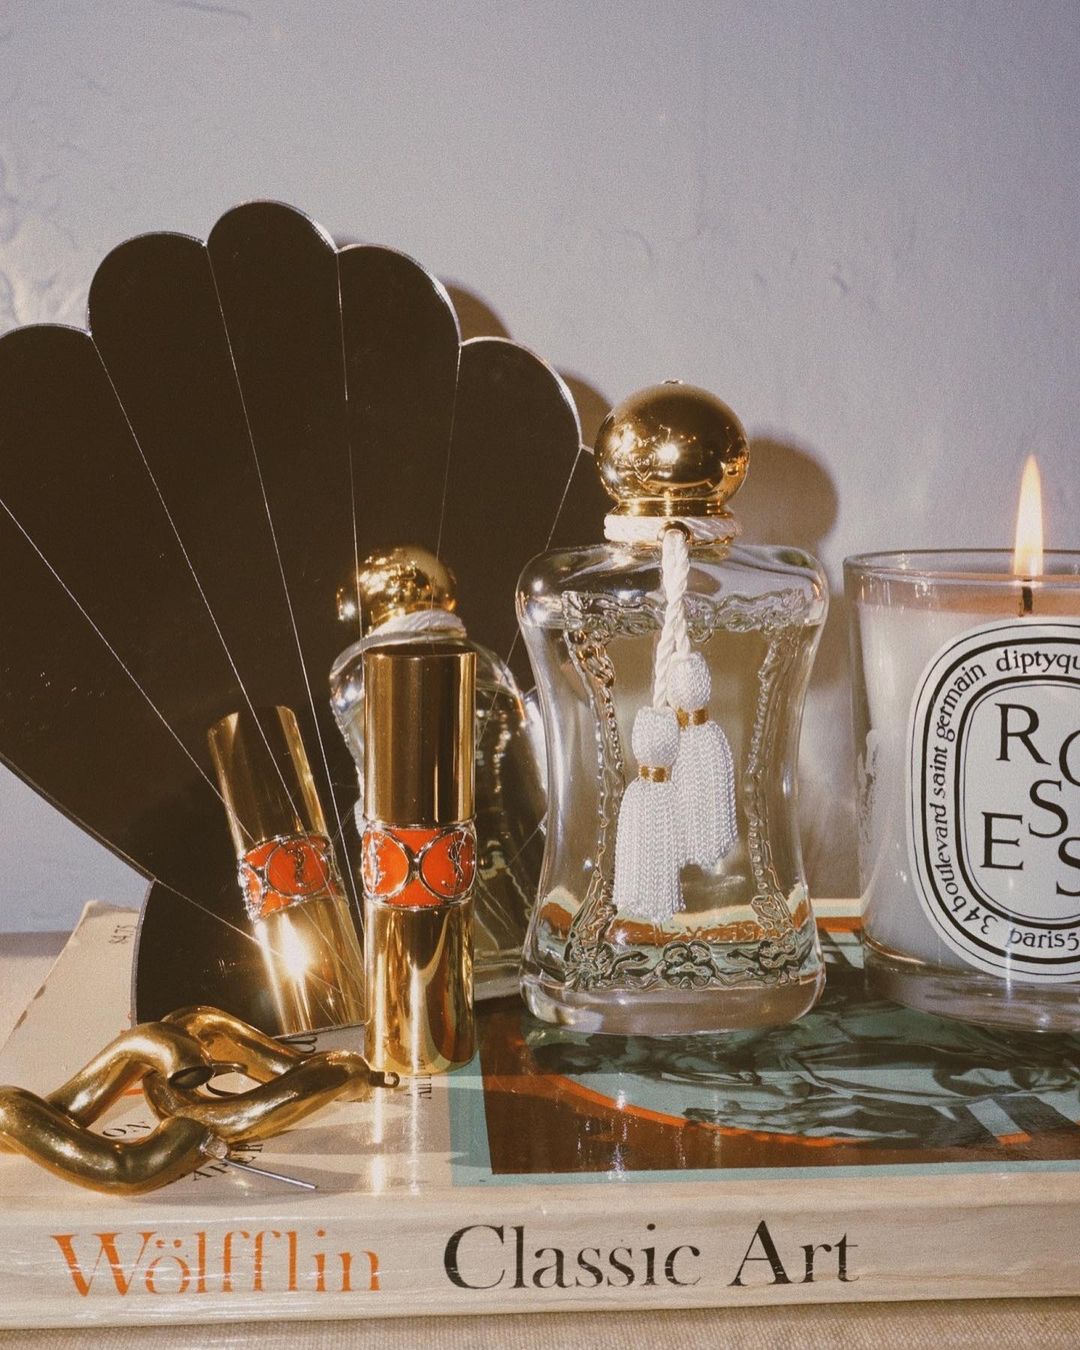 An aesthetic feminine tableau including Parfums de Marly, a YSL lipstick, and a seashell mirror from Urban Outfitters